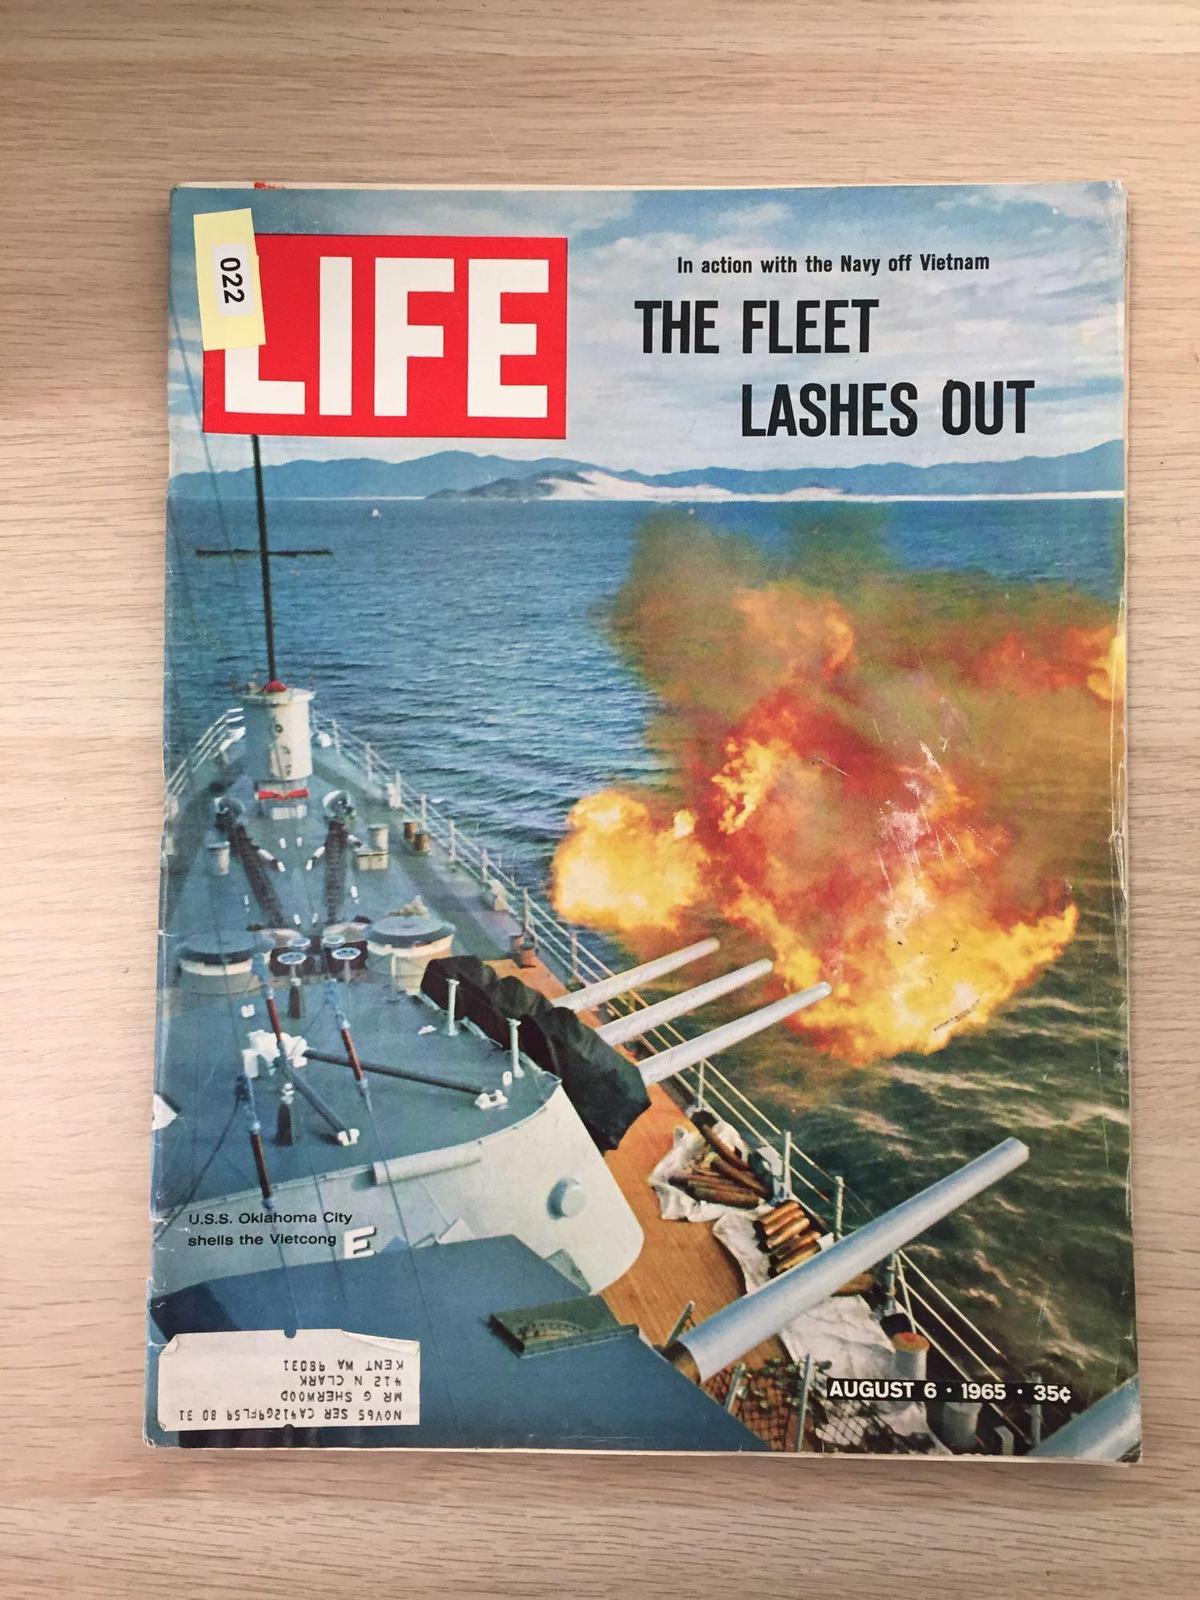 Life Magazine - "In Action With The Navy Off Vietnam The Fleet Lashes Out" August 6, 1965